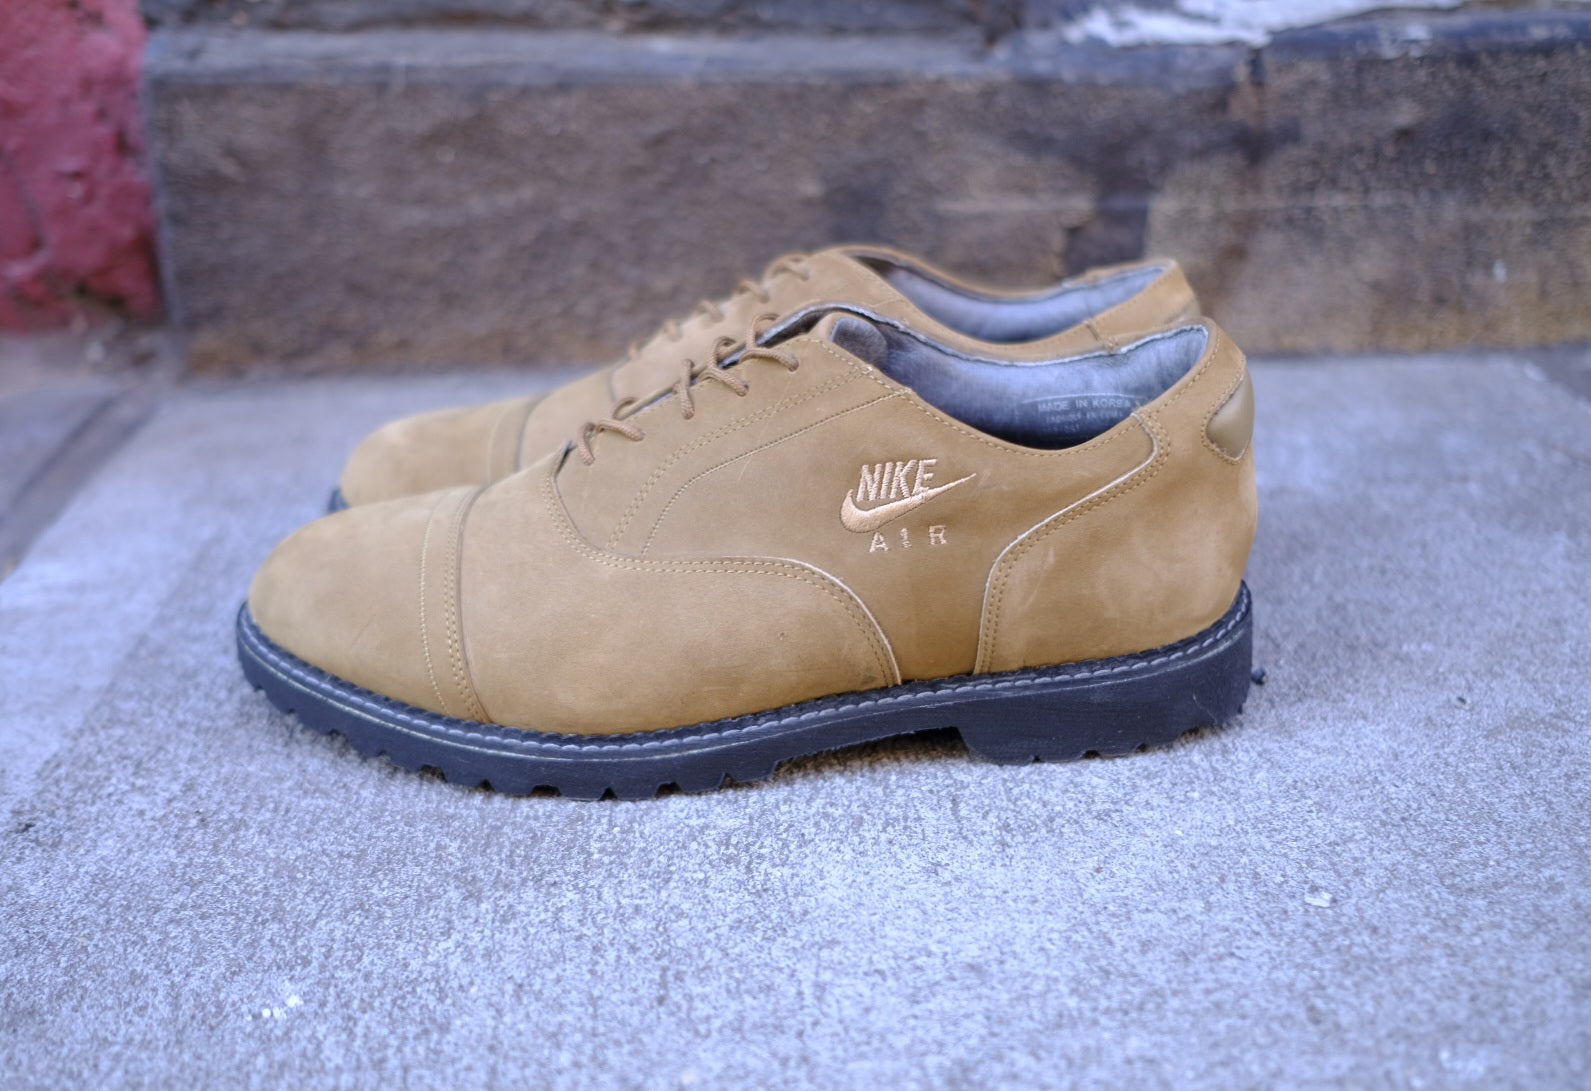 reconstructed 1998 nike air golf shoes - m us 9.5